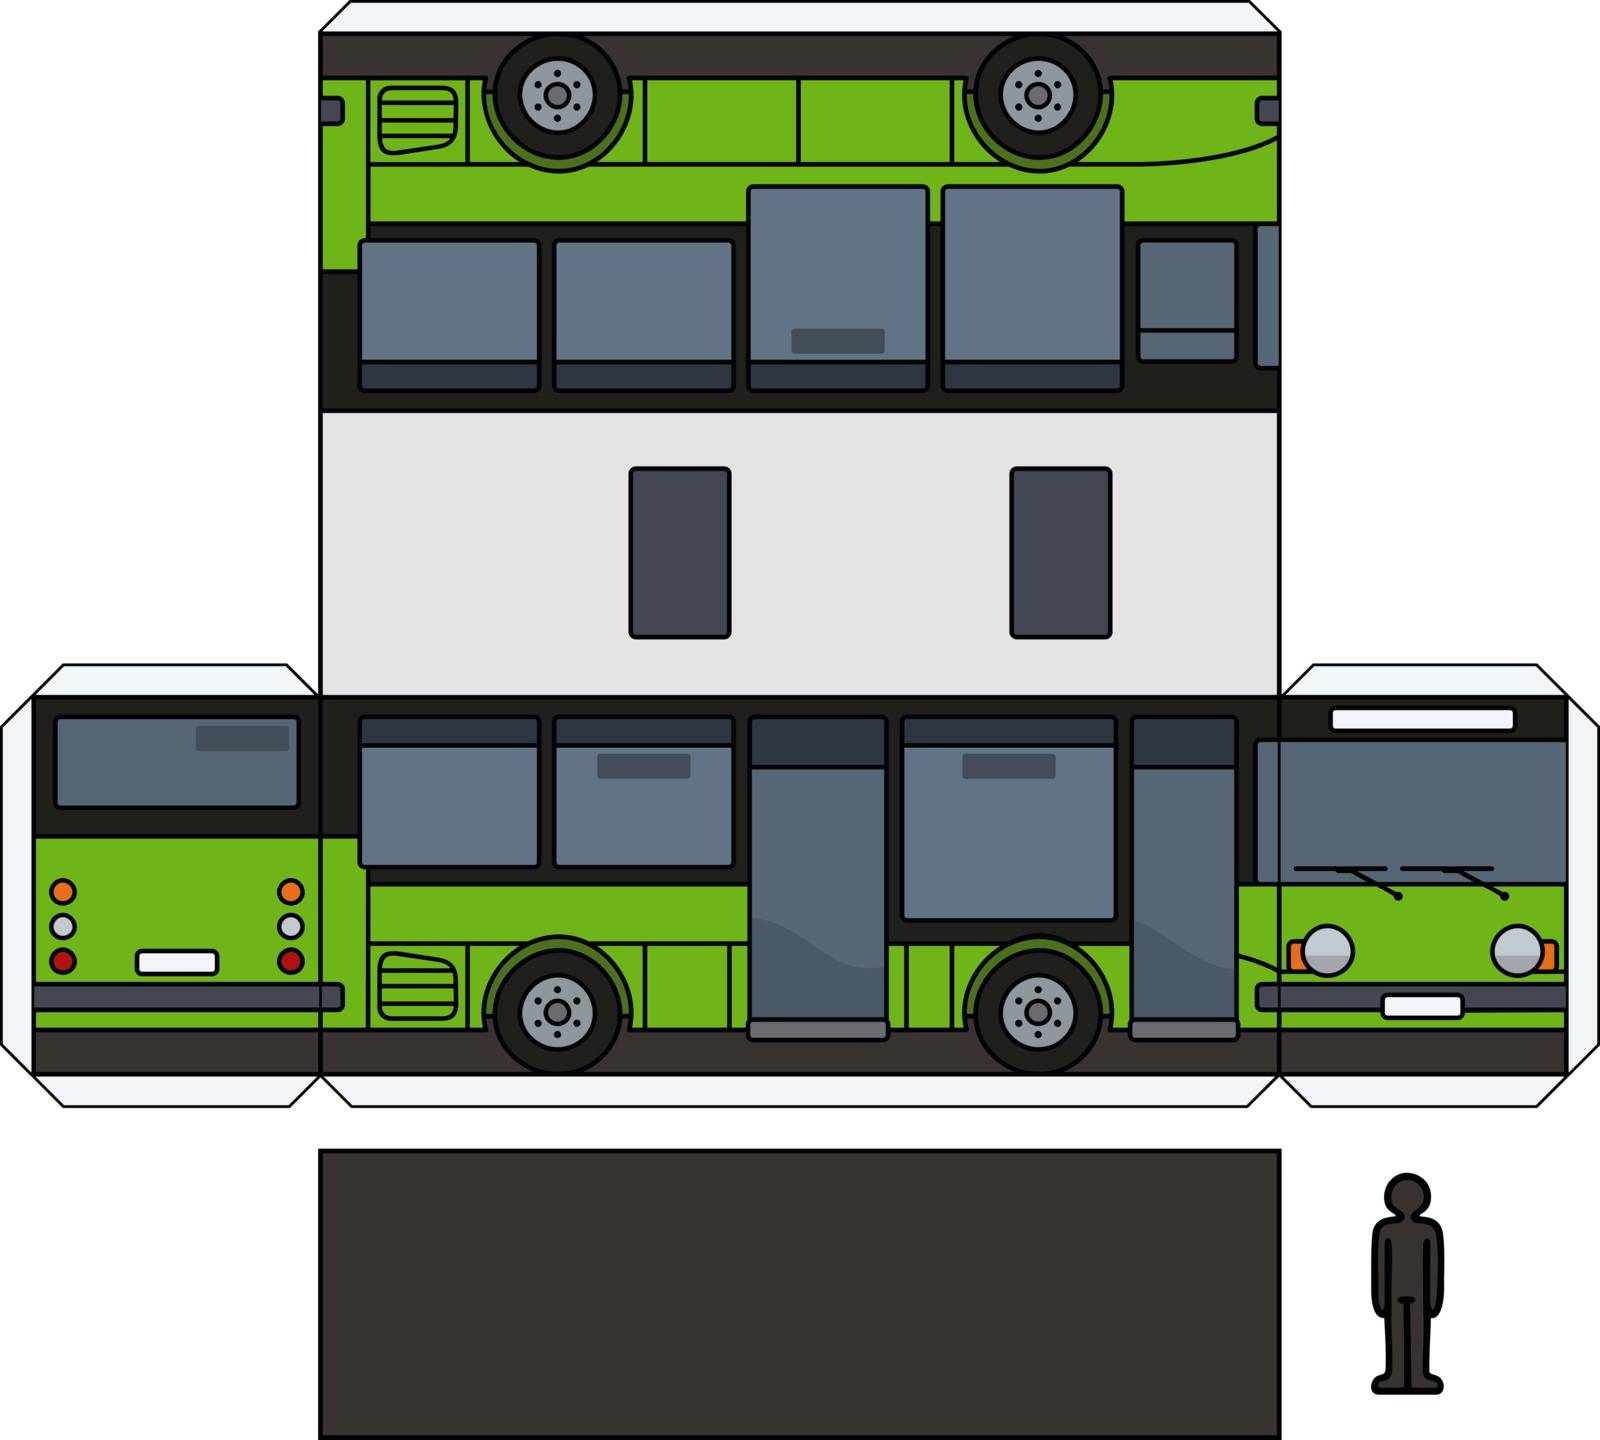 The simple vector paper model of a black and green small bus